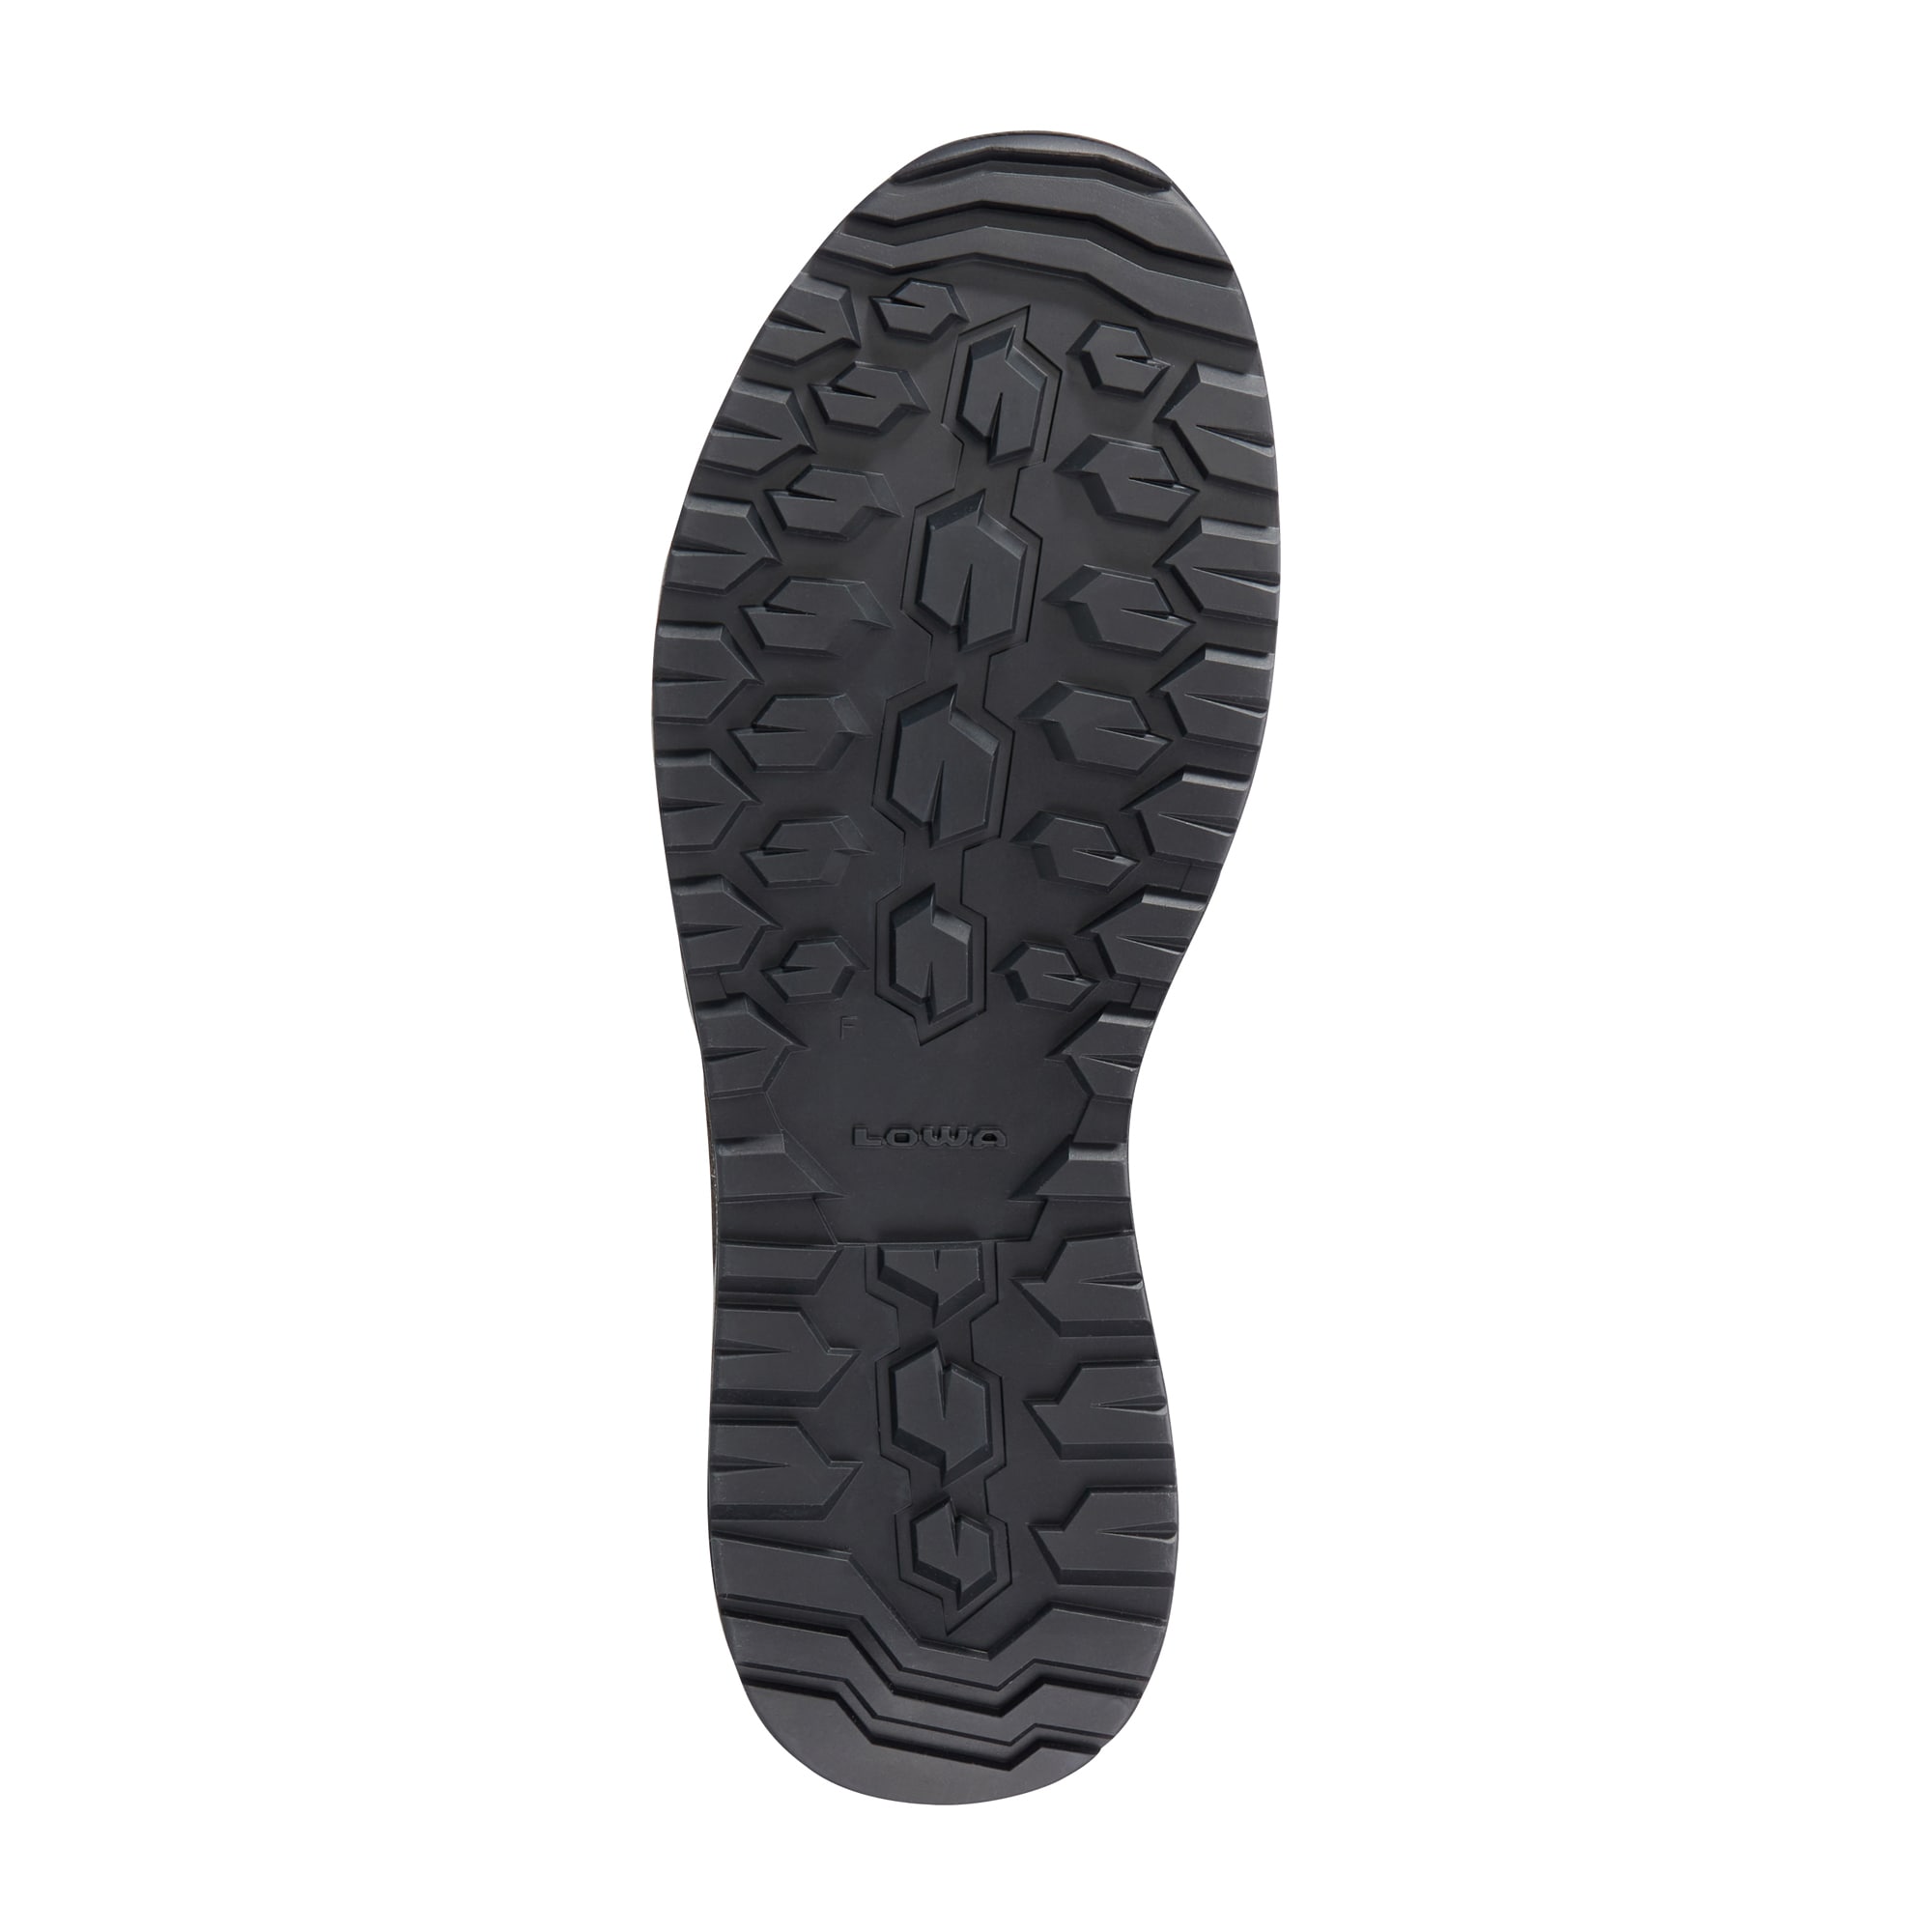 Purchase the LOWA Women's Boots Malta GTX Mid anthracite by ASMC